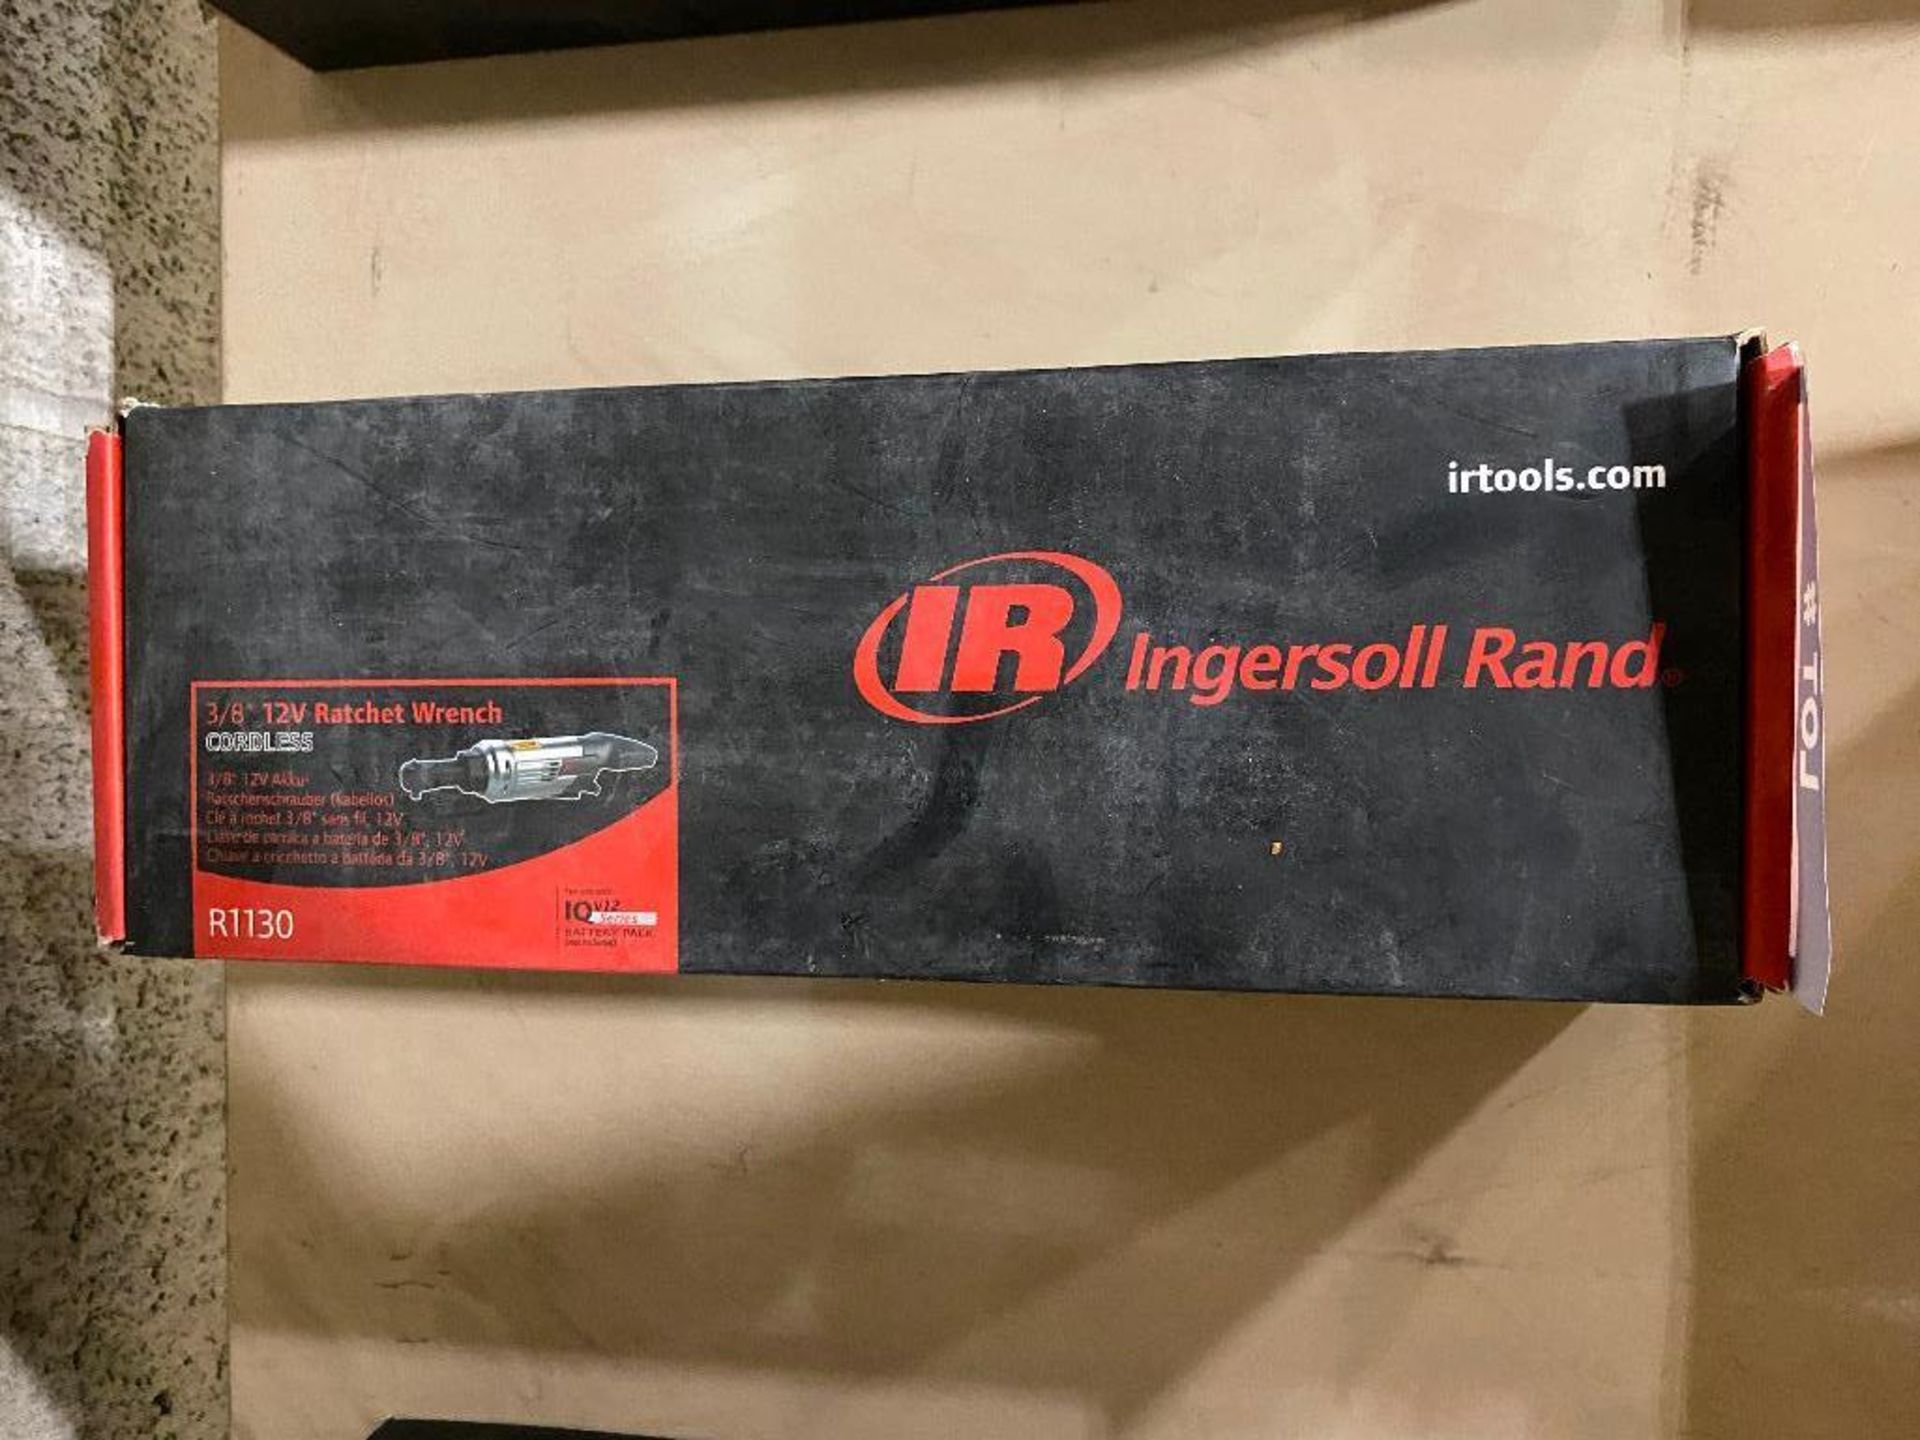 Ingersoll Rand R1130 3/8" 12V Cordless Ratchet Wrench - Image 2 of 3